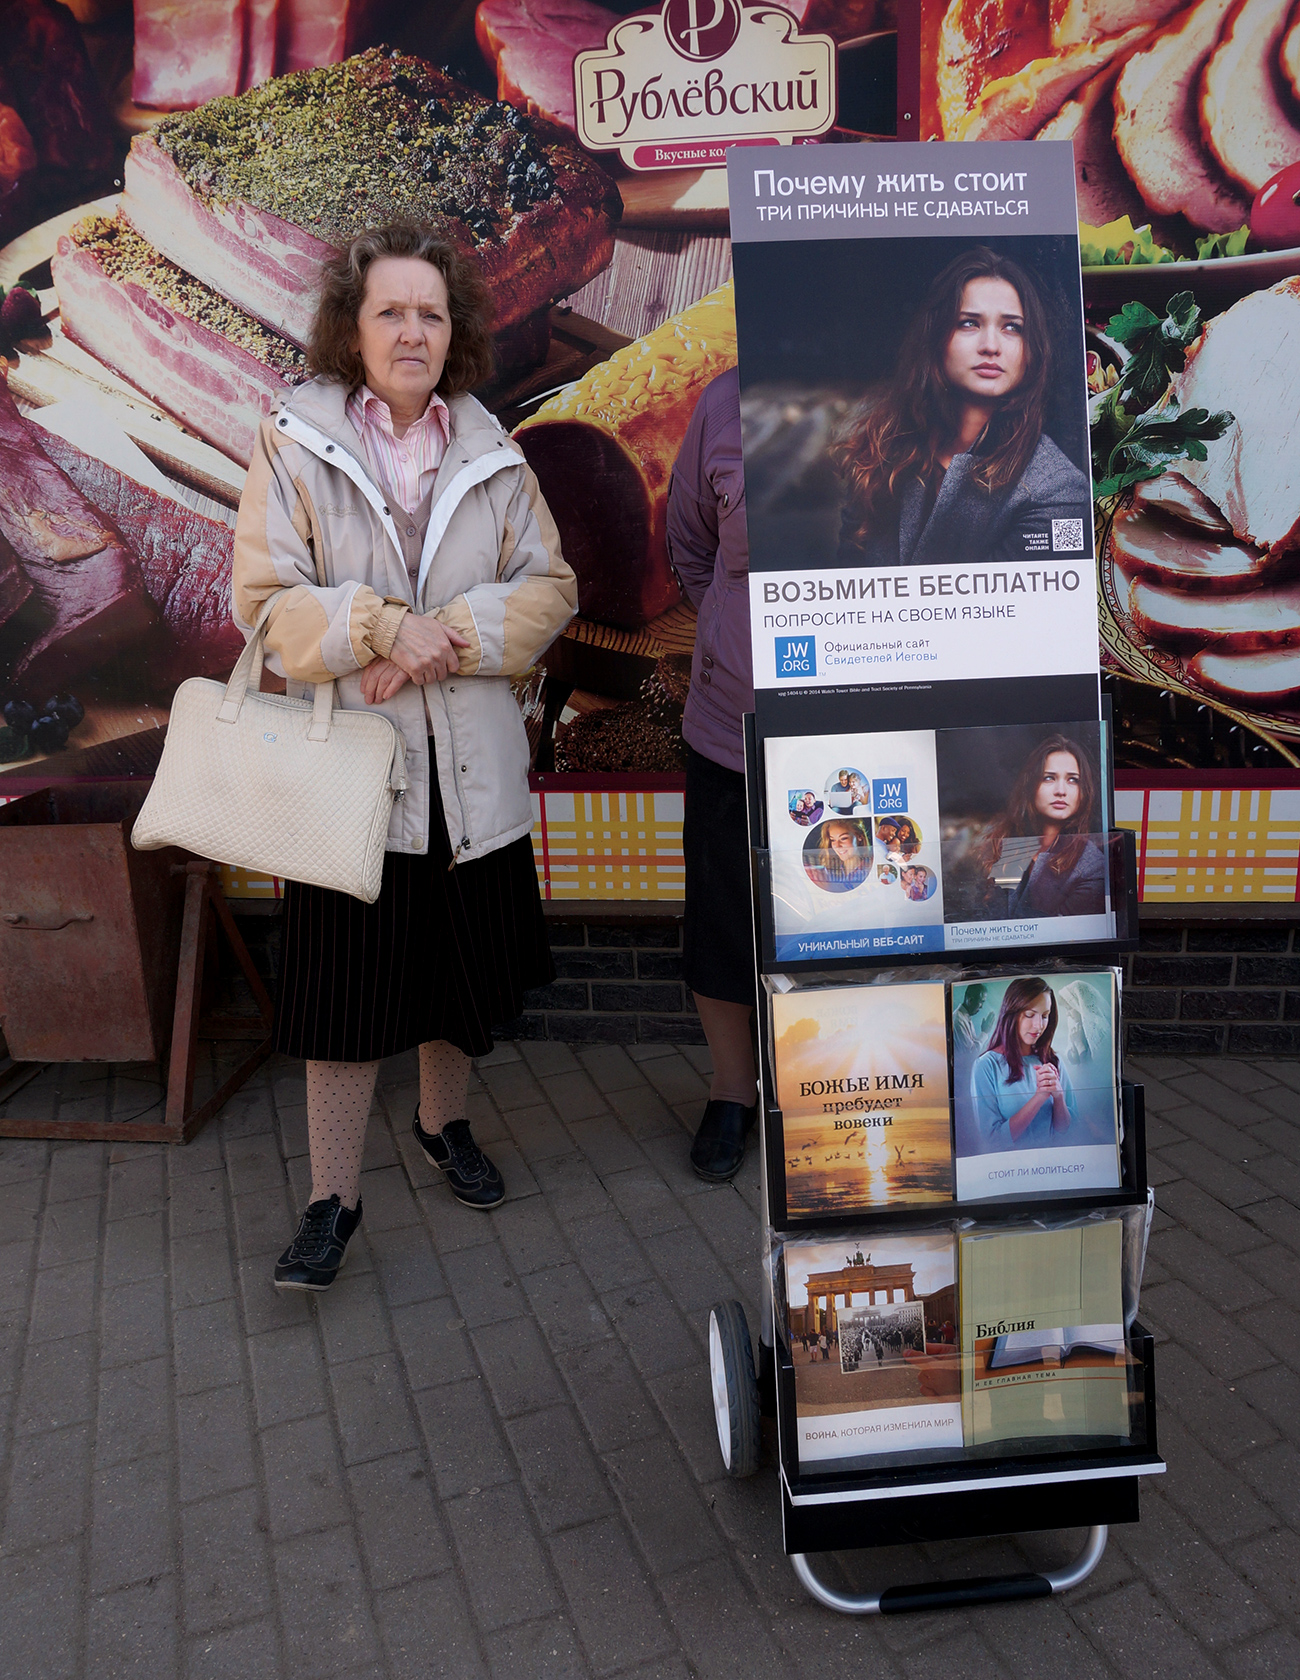 A Russian woman at a street stand offering Jehovah’s Witnesses' literature. Source: Alexander Artemenkov / TASS